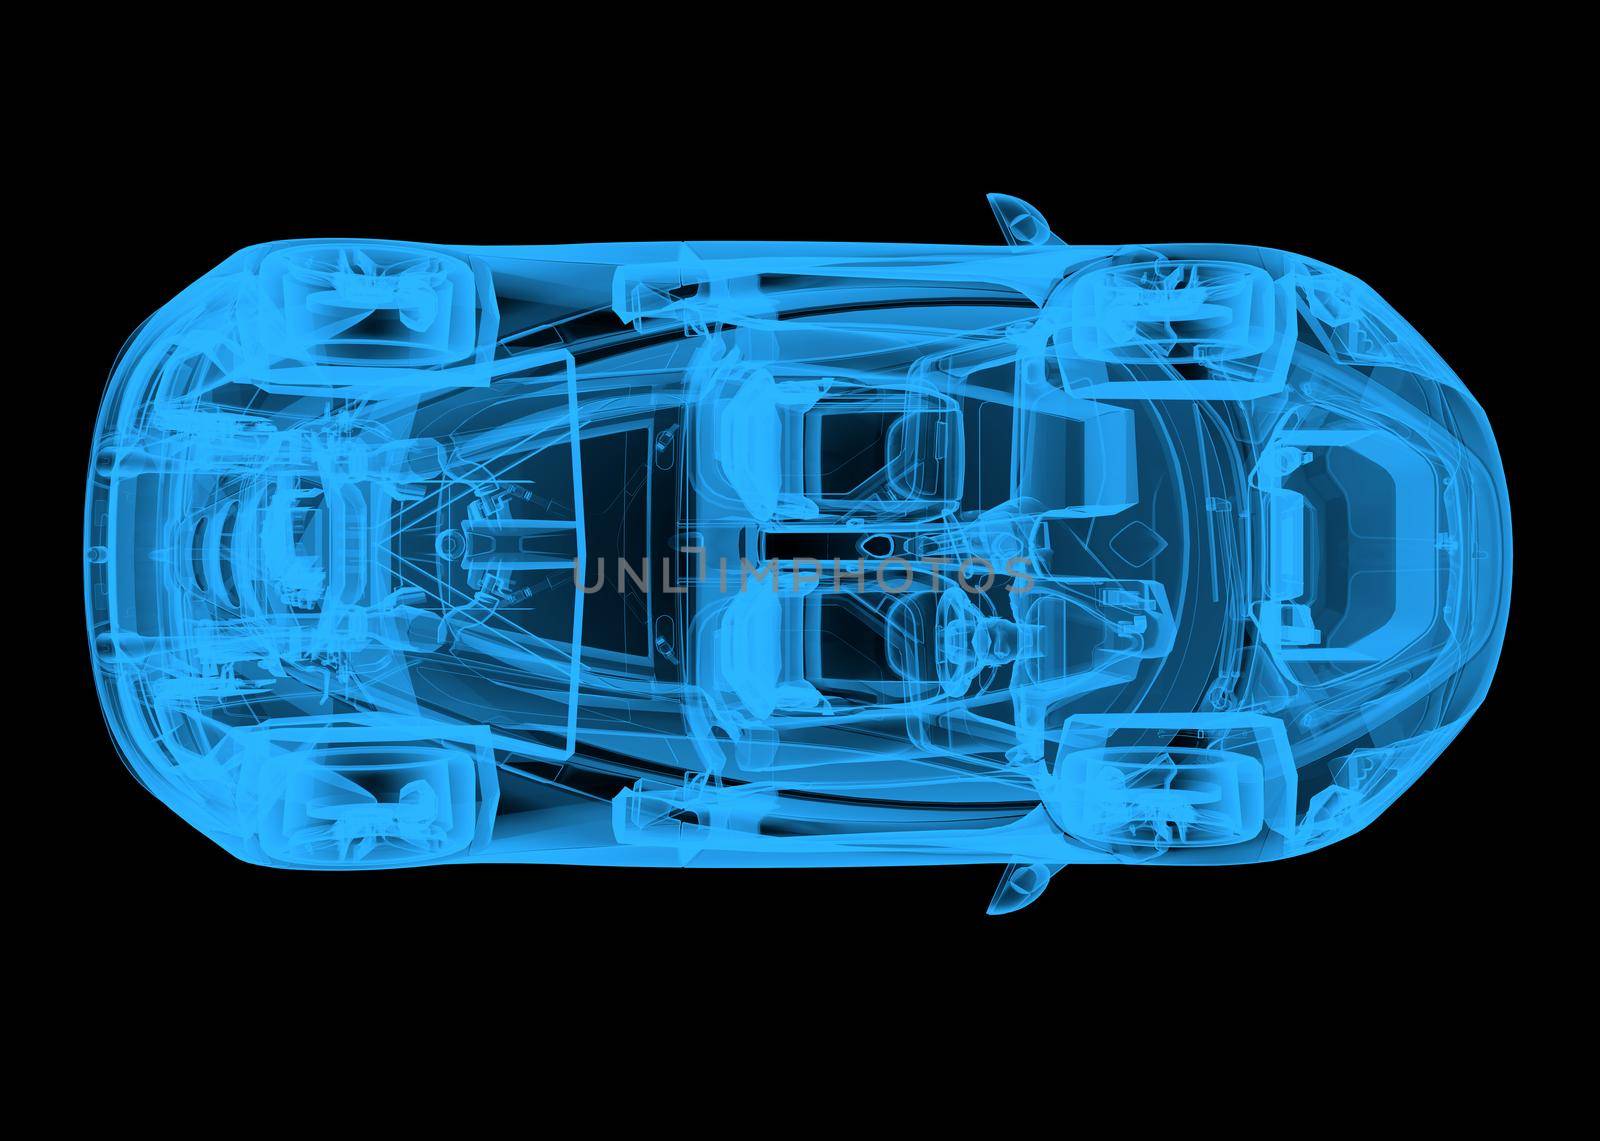 Top view of a wireframe blue car on a black background. 3d illustration